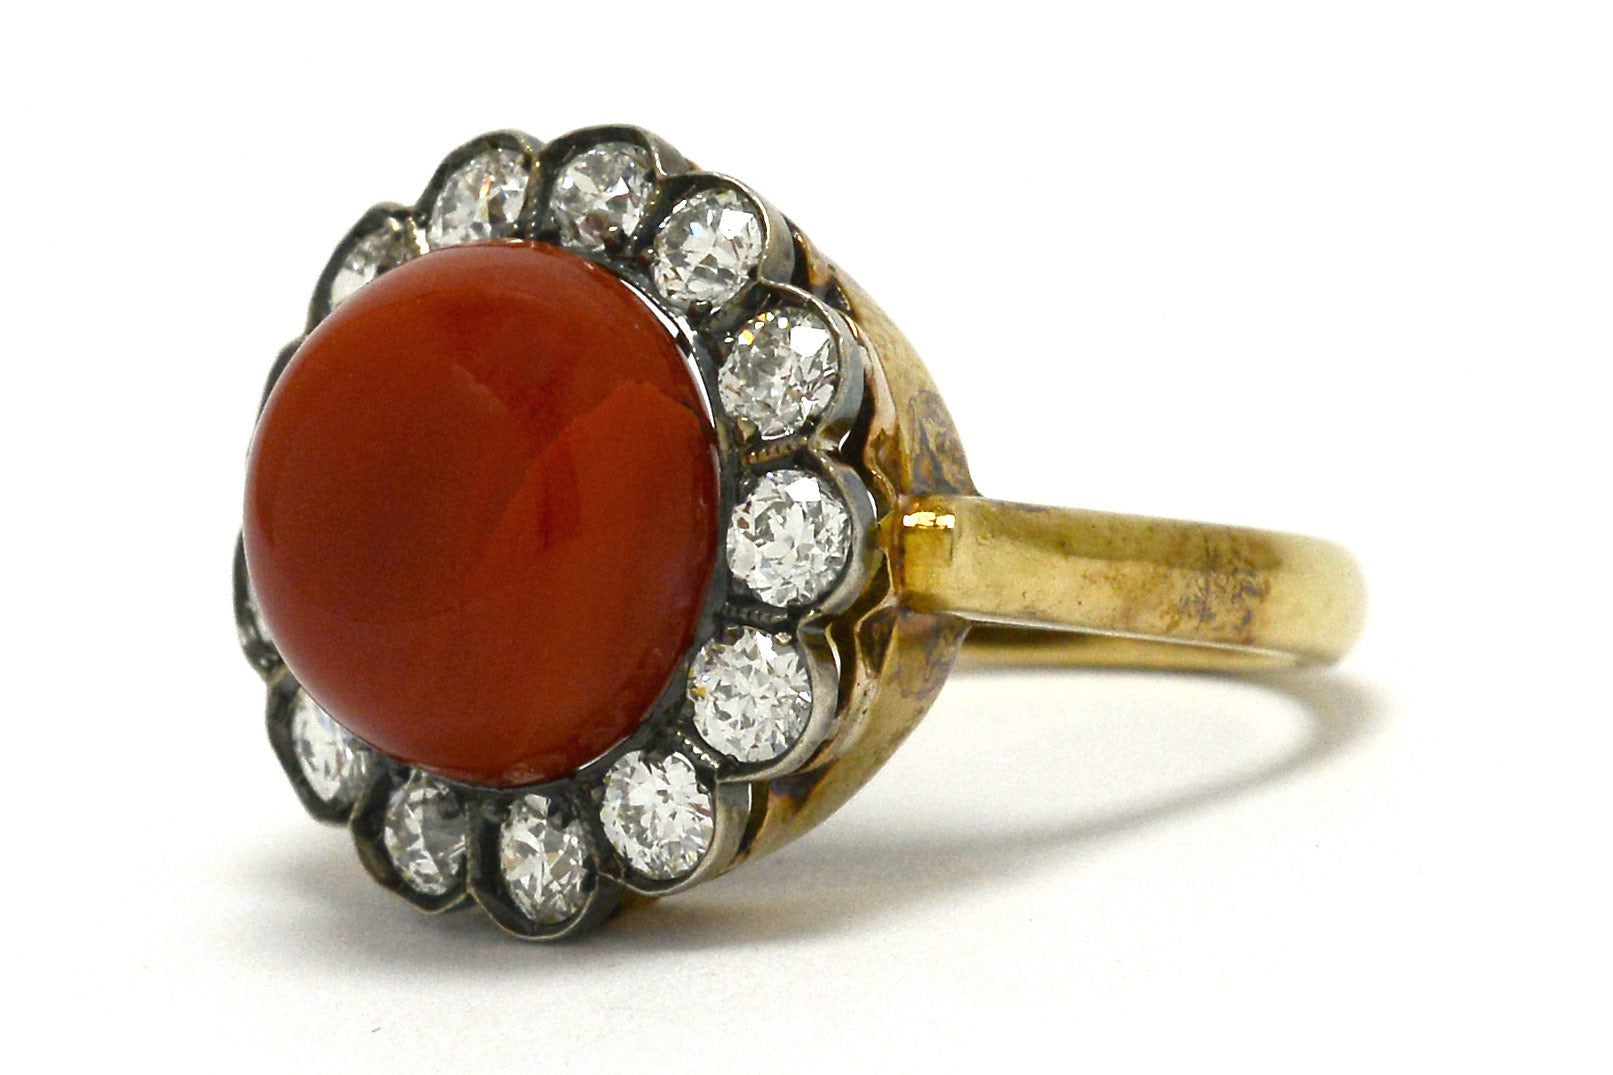 An antique, Victorian coral ring with a halo of diamonds.